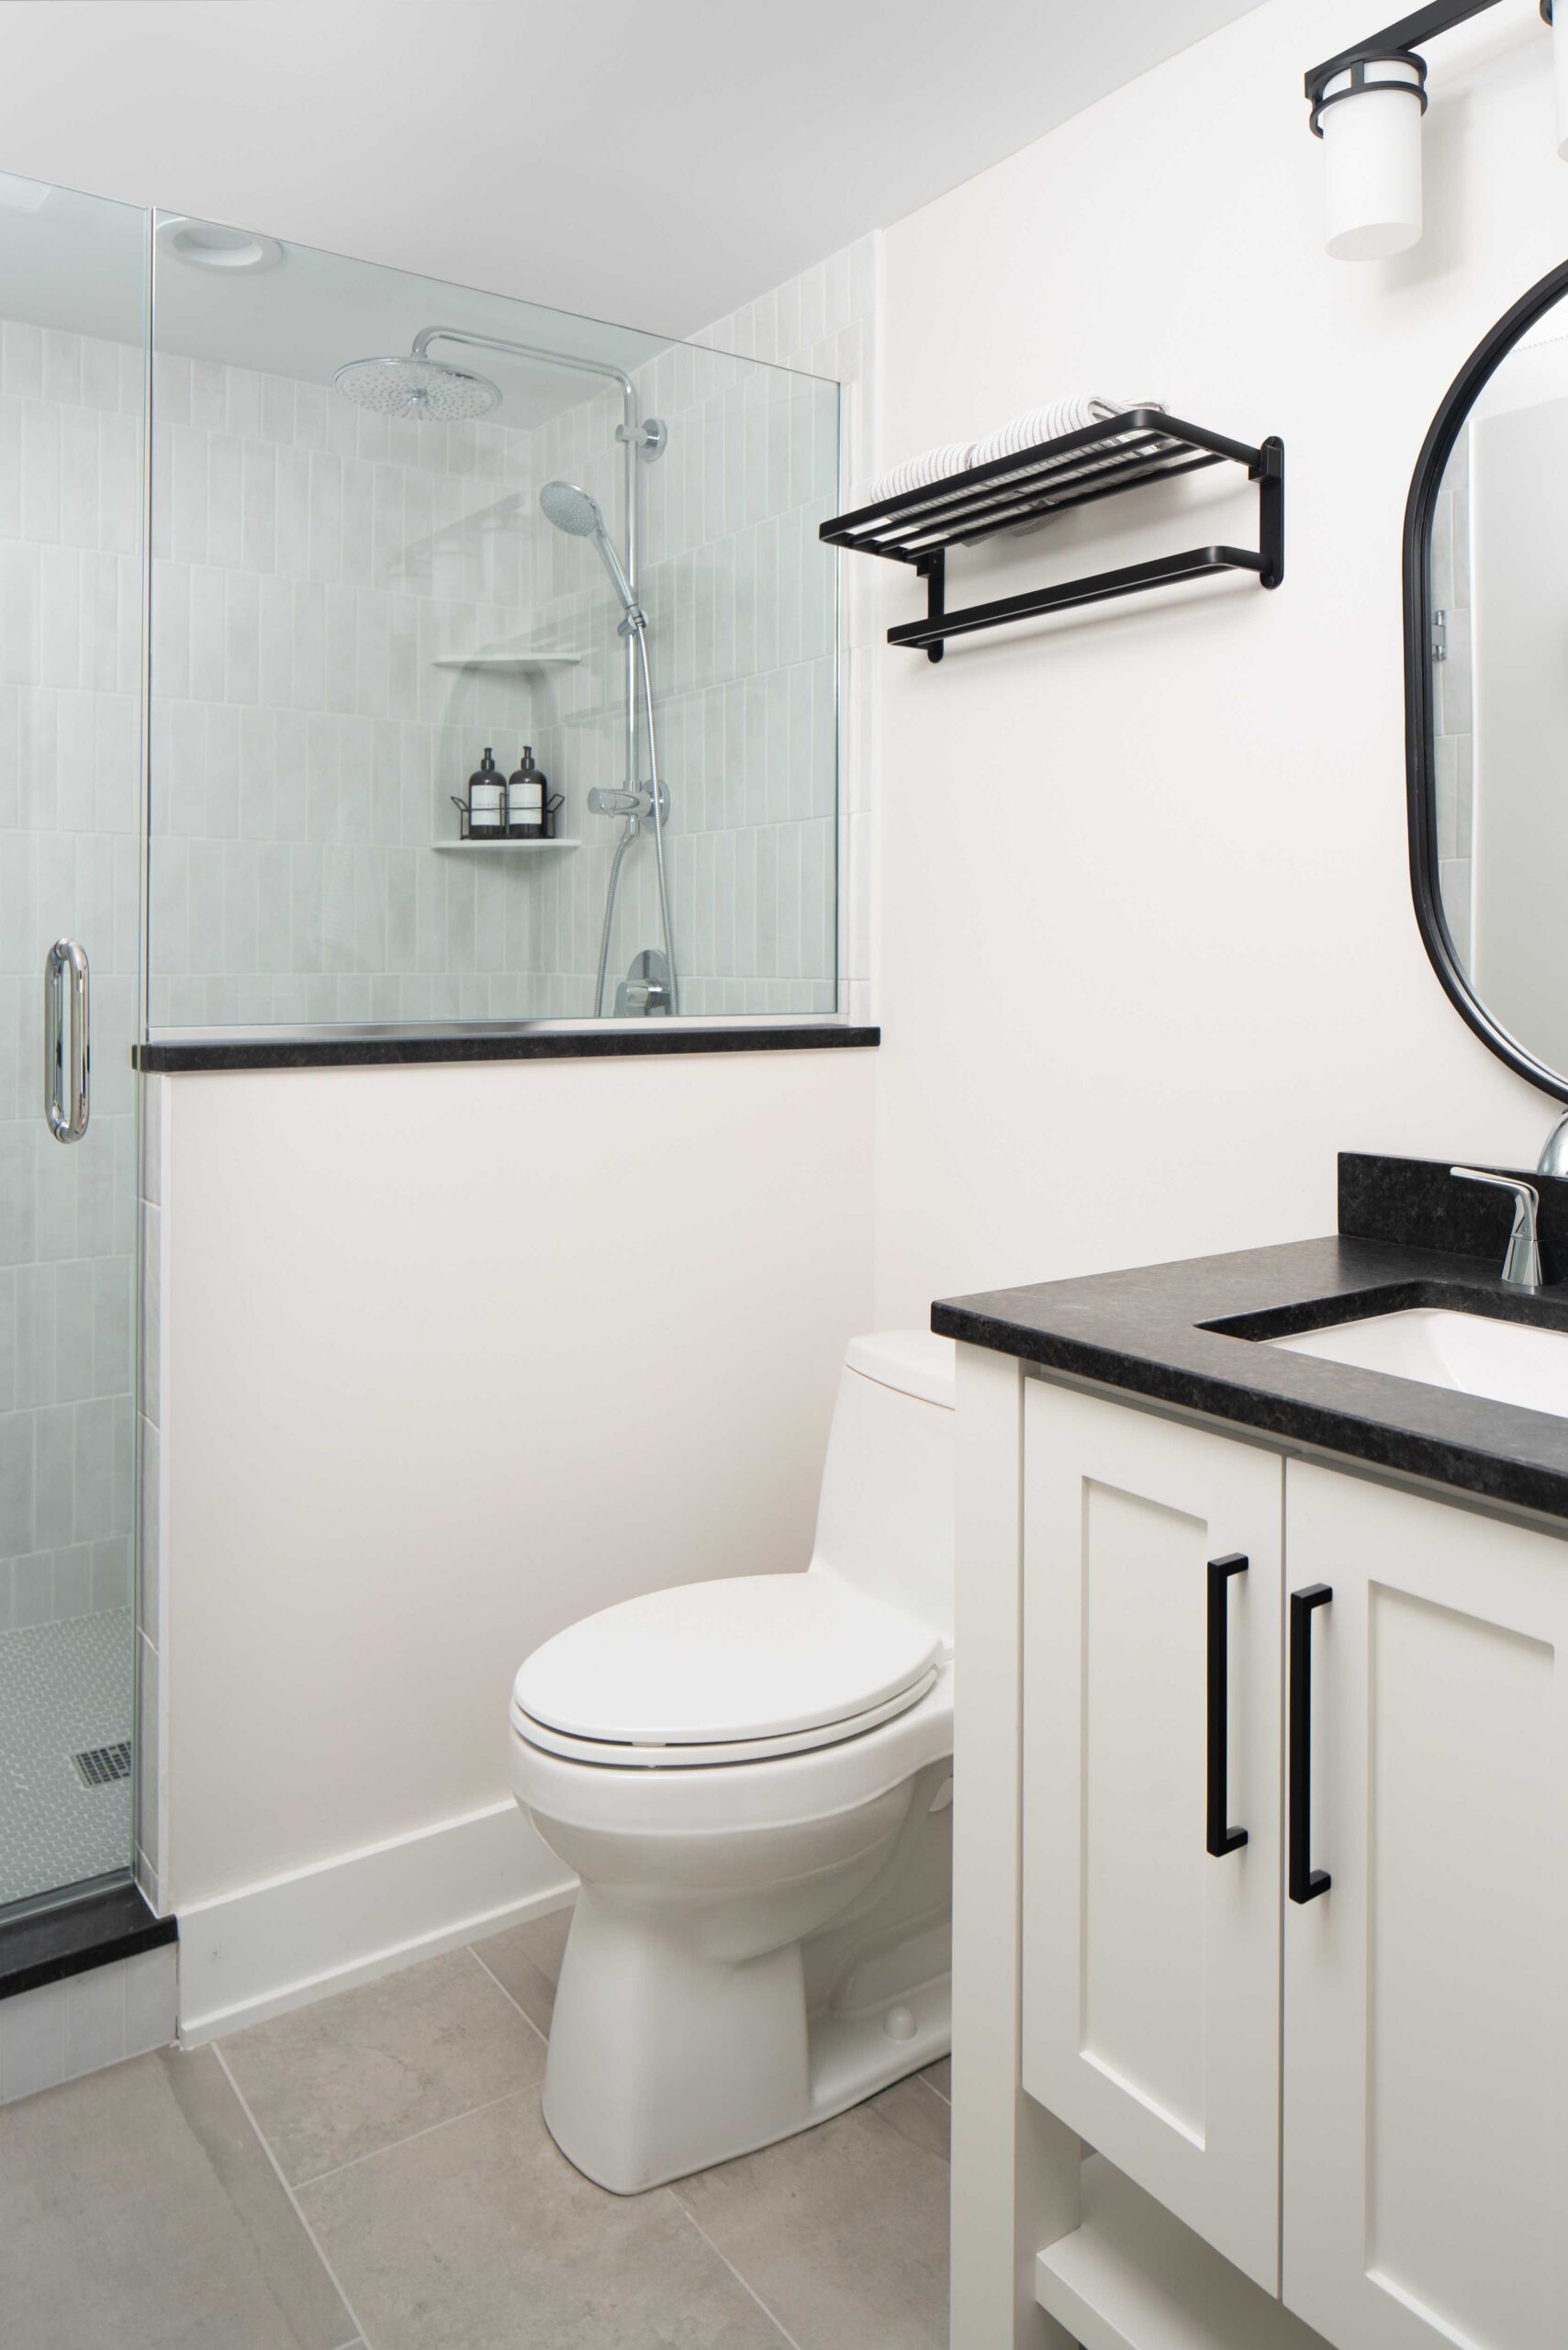 The Orchard Lake Remodel features a stylish black and white bathroom with a sleek glass shower stall.